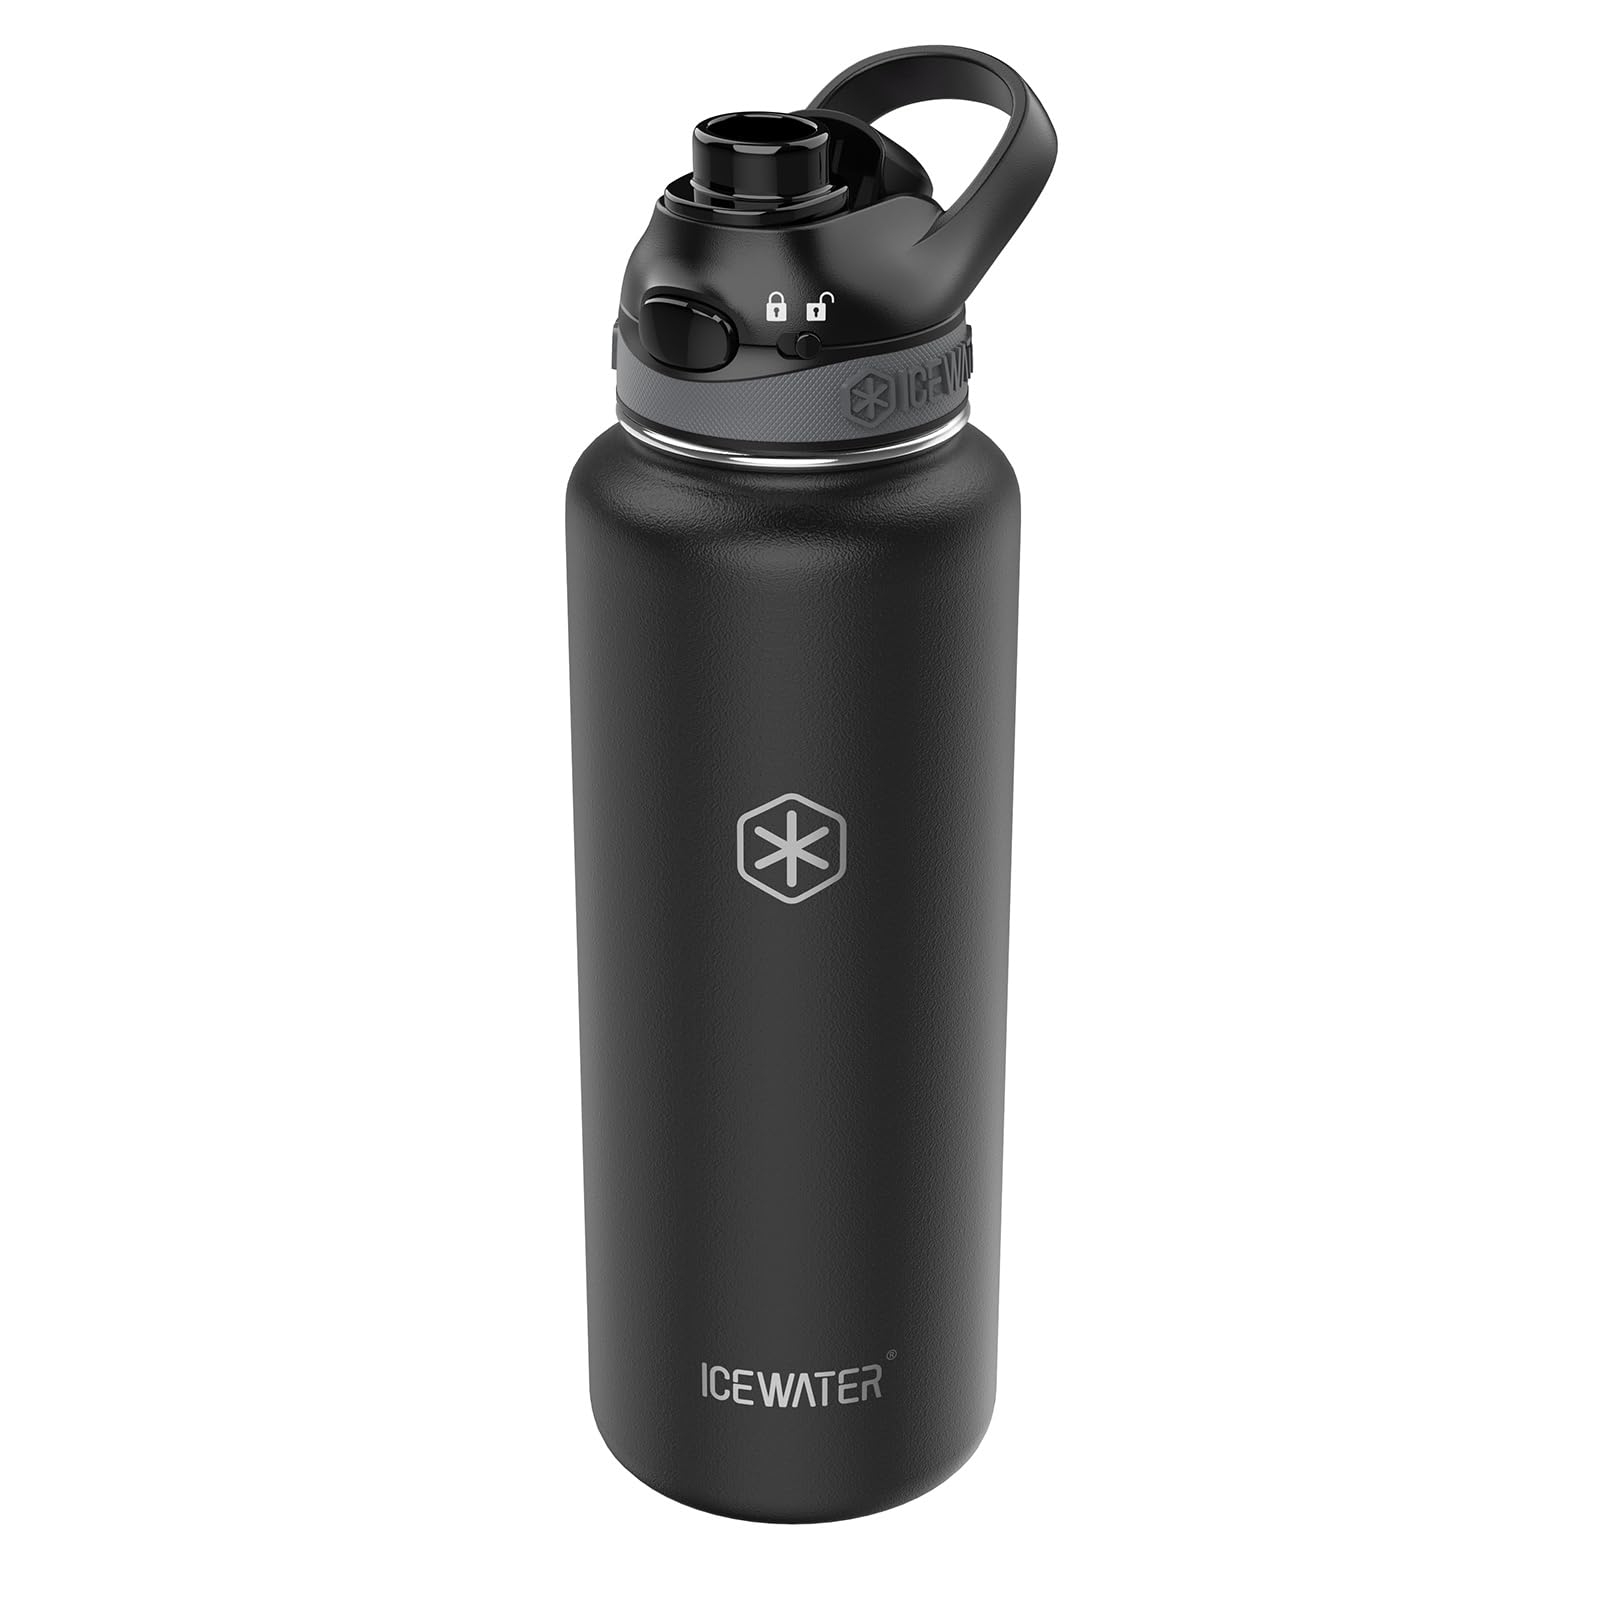 ICEWATER-40 oz, Auto Spout Lid, Stainless Steel Water Bottle